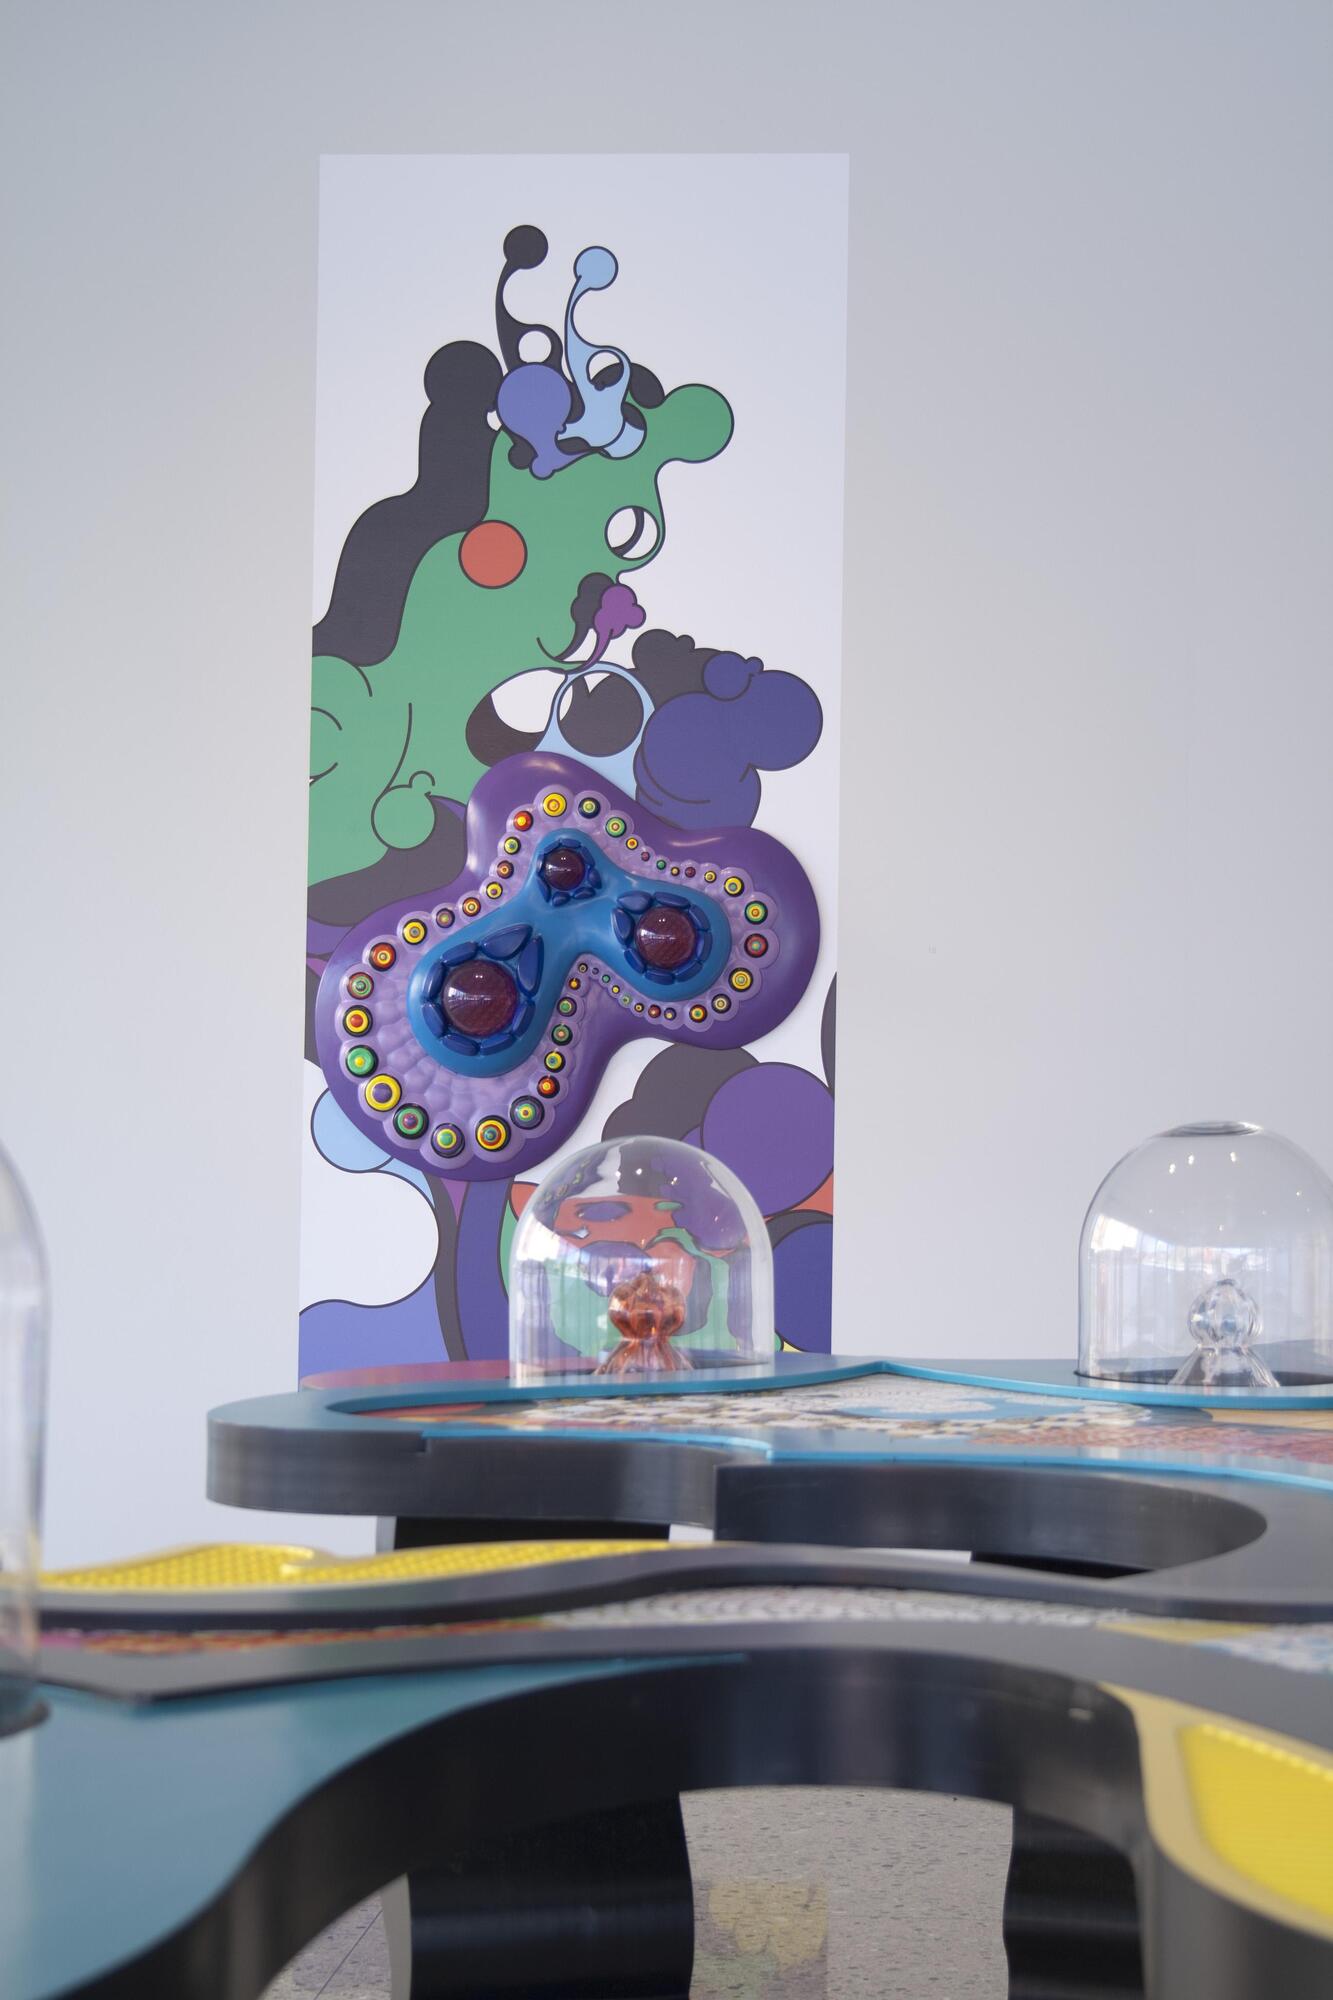 A purple omeba-shaped form that has mutli-colored circles and blue designs on top. It hangs on a wall on top of a vinyl rectangle that has similar designs.